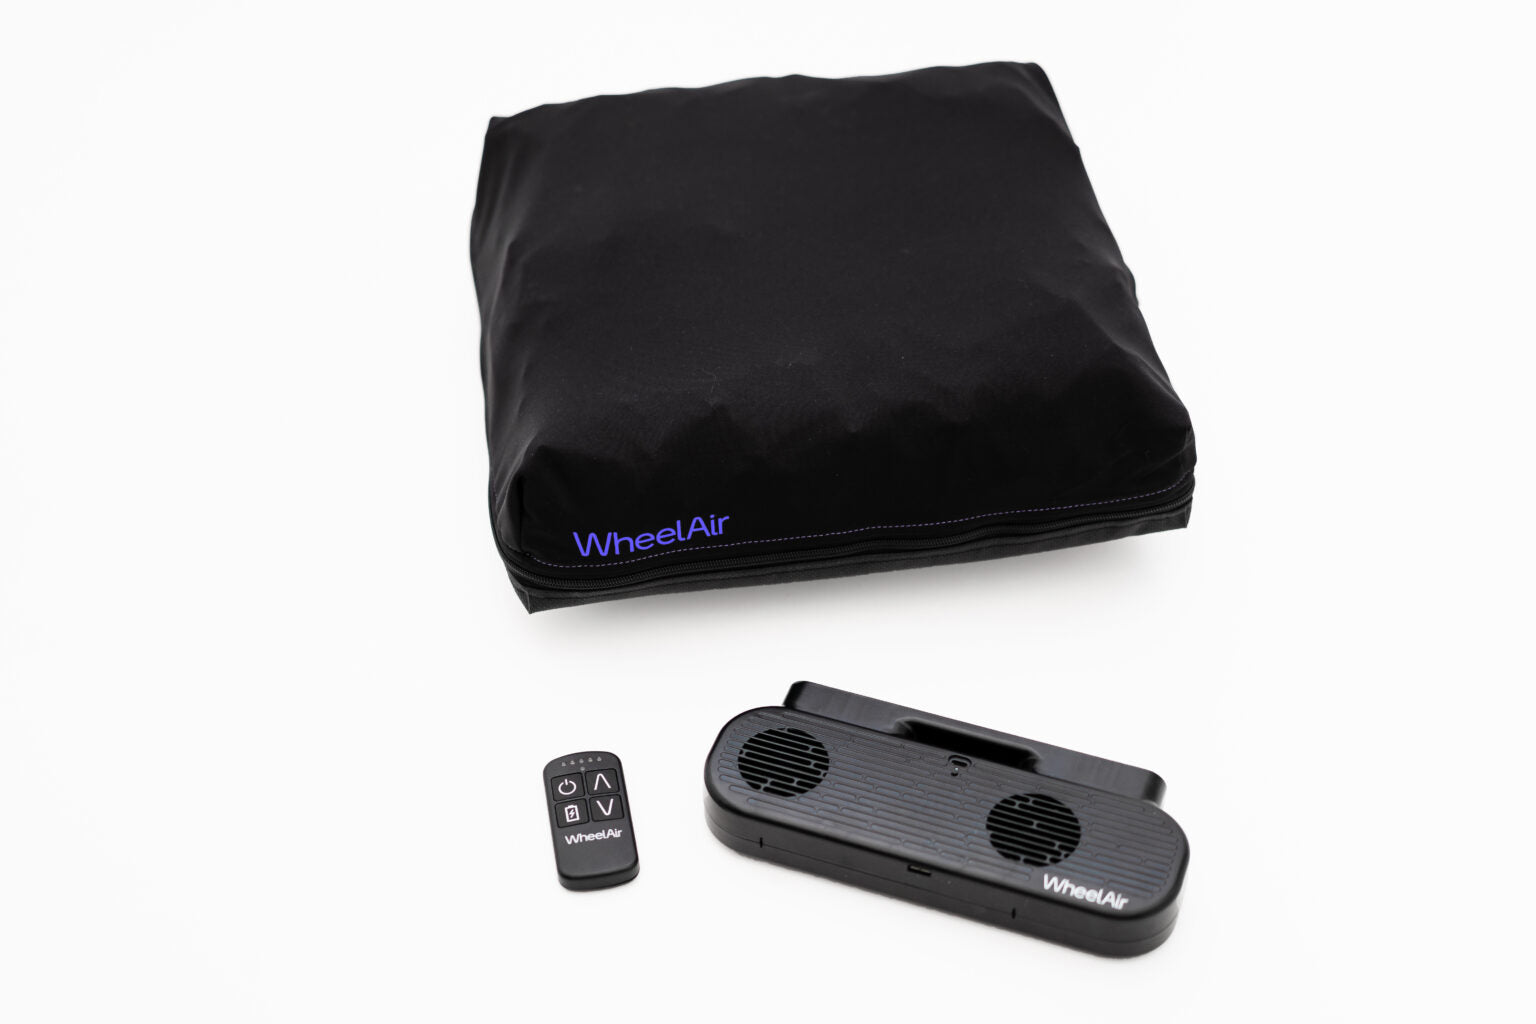 The WheelAir system is placed on a white background, including a wheelchair cushion cover, a small black remote control, and the double fan encased in a black housing.